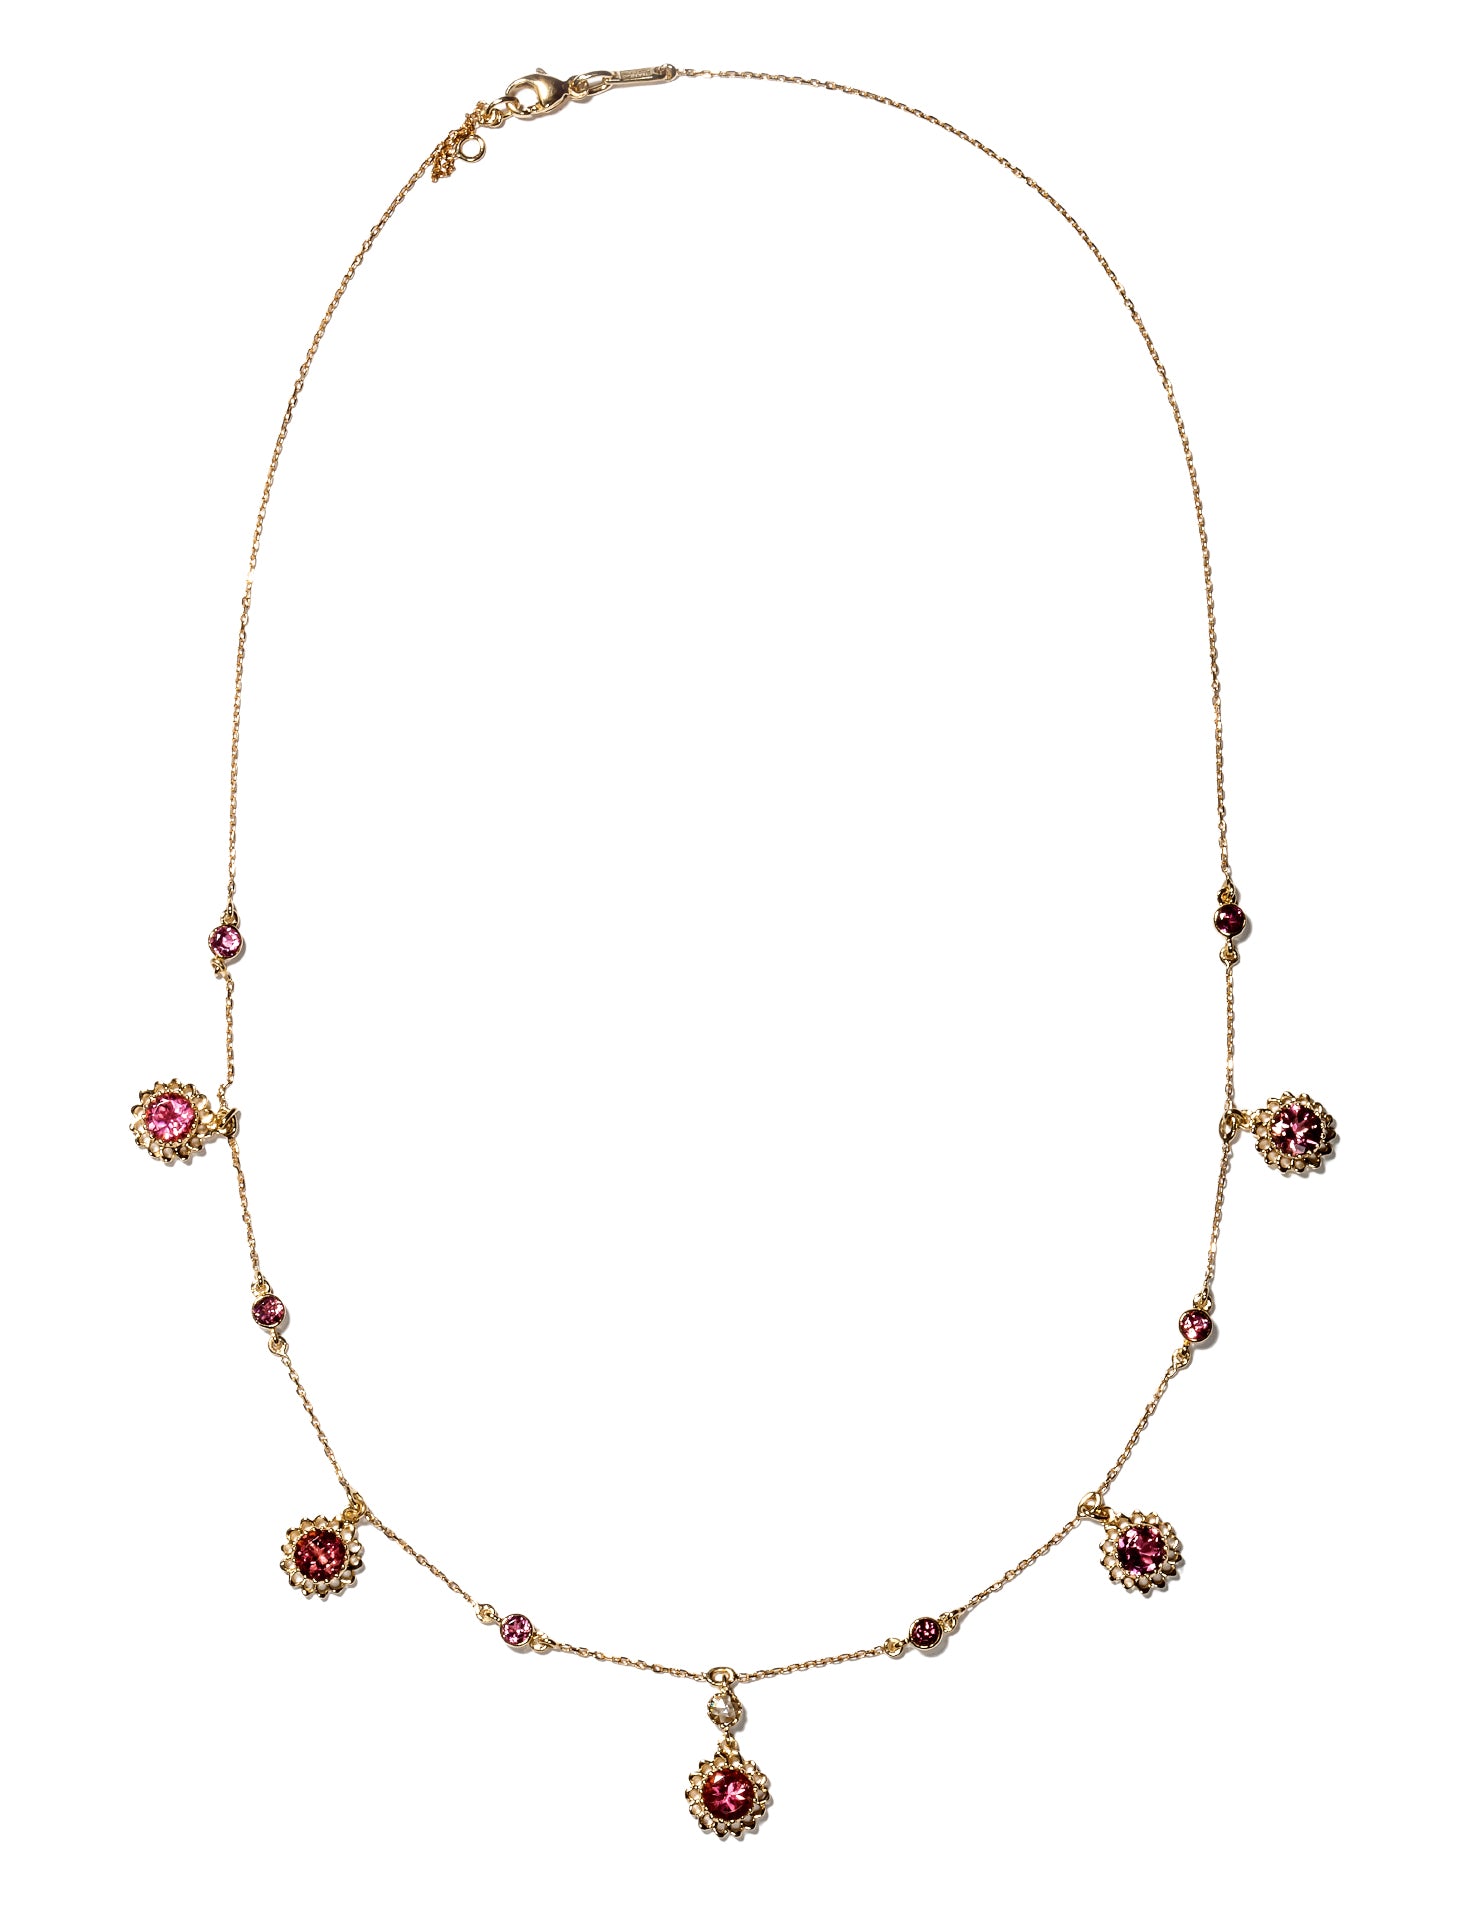 Aghabani Necklace with Pink Tourmalines, Diamonds and Floral Motif